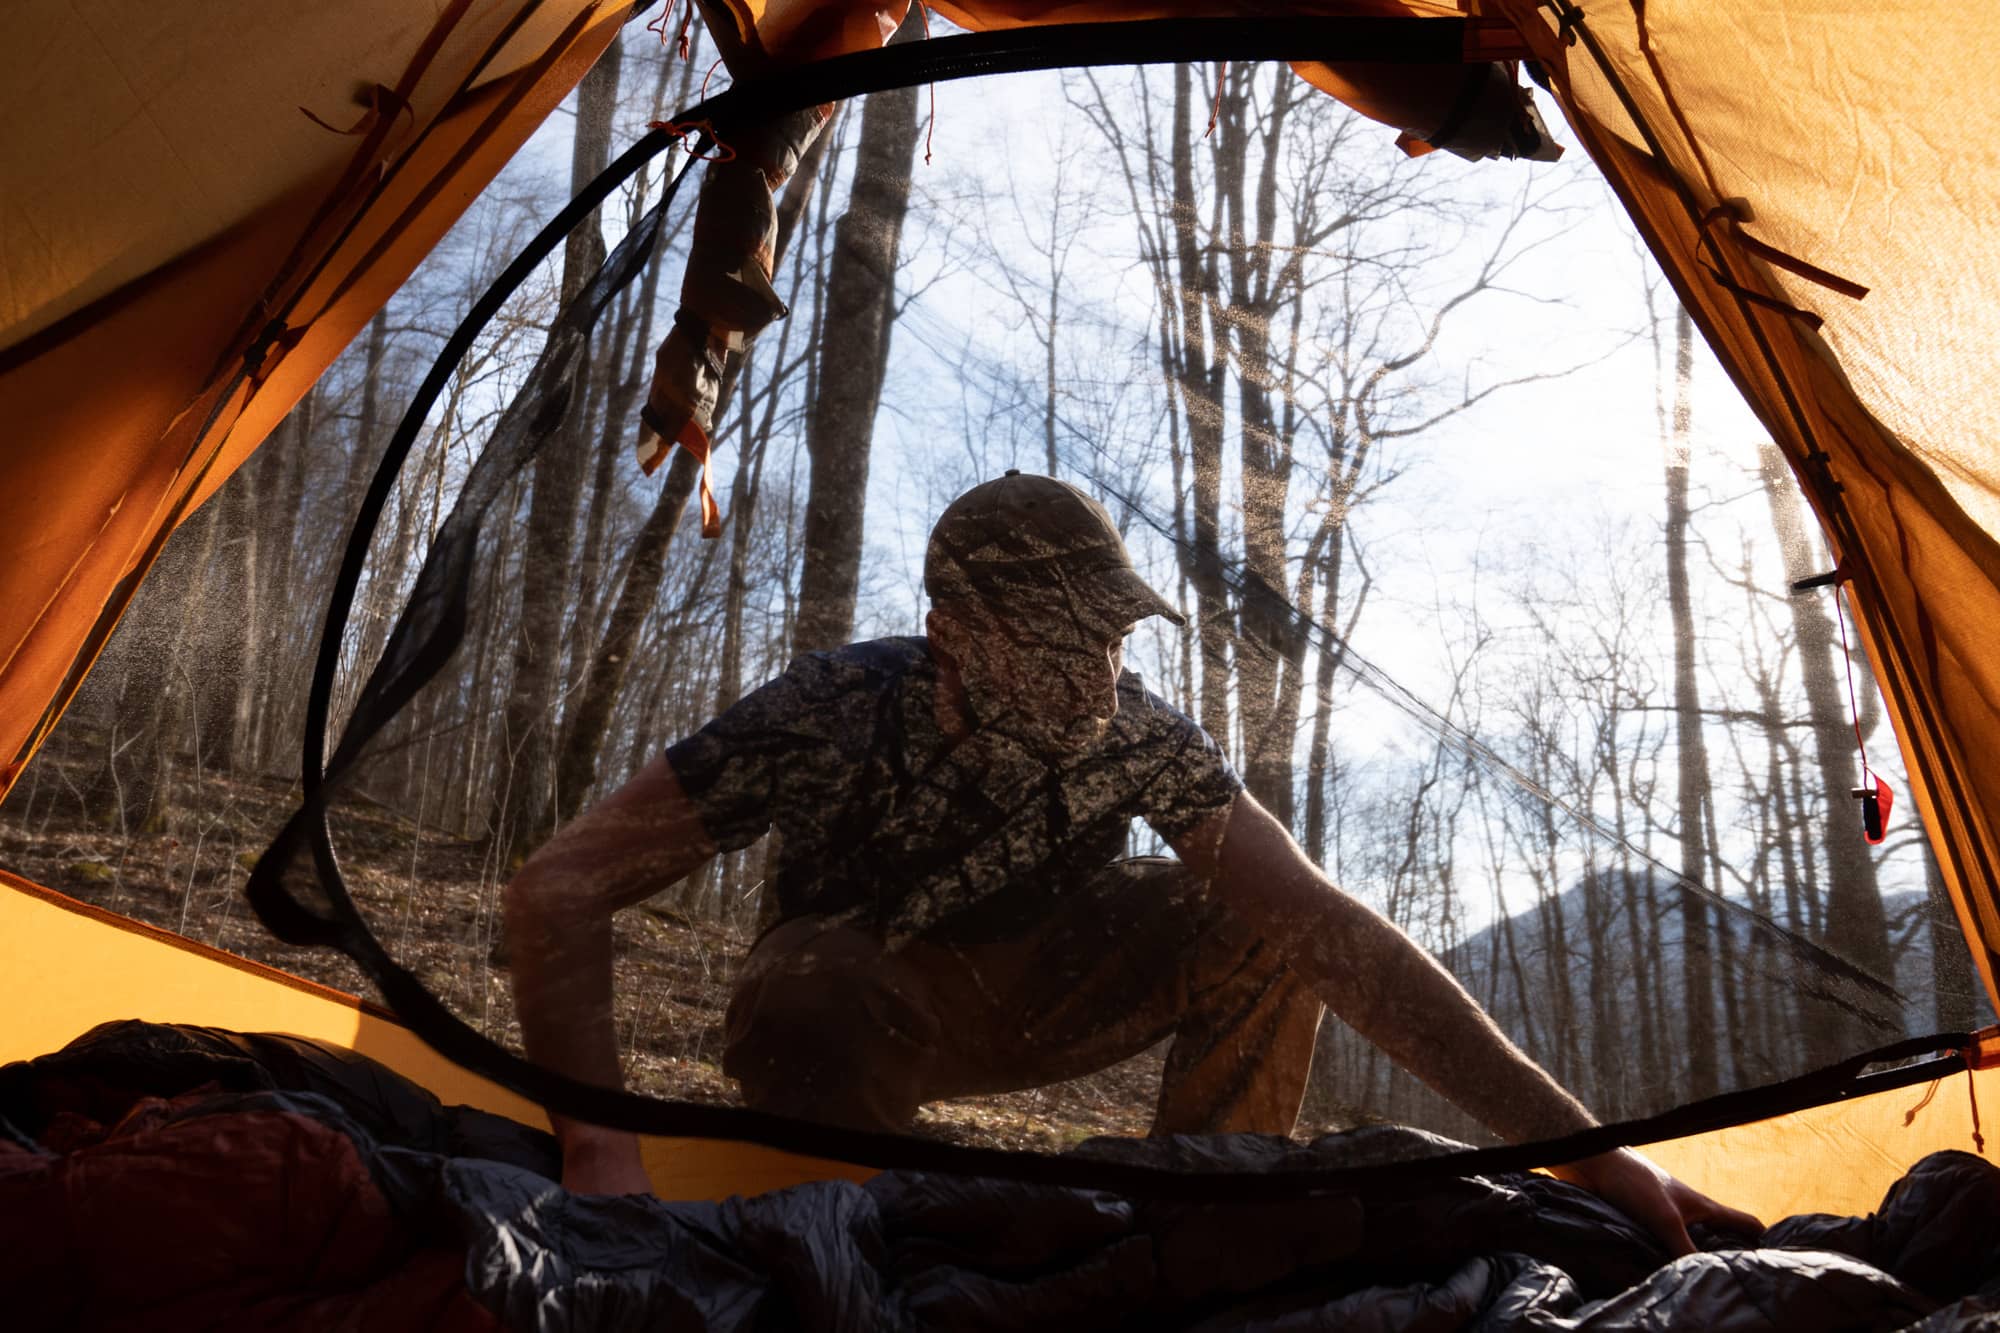 Eamonn Bell hike lays his sleeping bag in our tent during his first night backpacking a section of the Appalachian Trail in the Nantahala National Forest on Saturday, March 5, 2022, at the Rock Gap campground near Franklin, North Carolina.